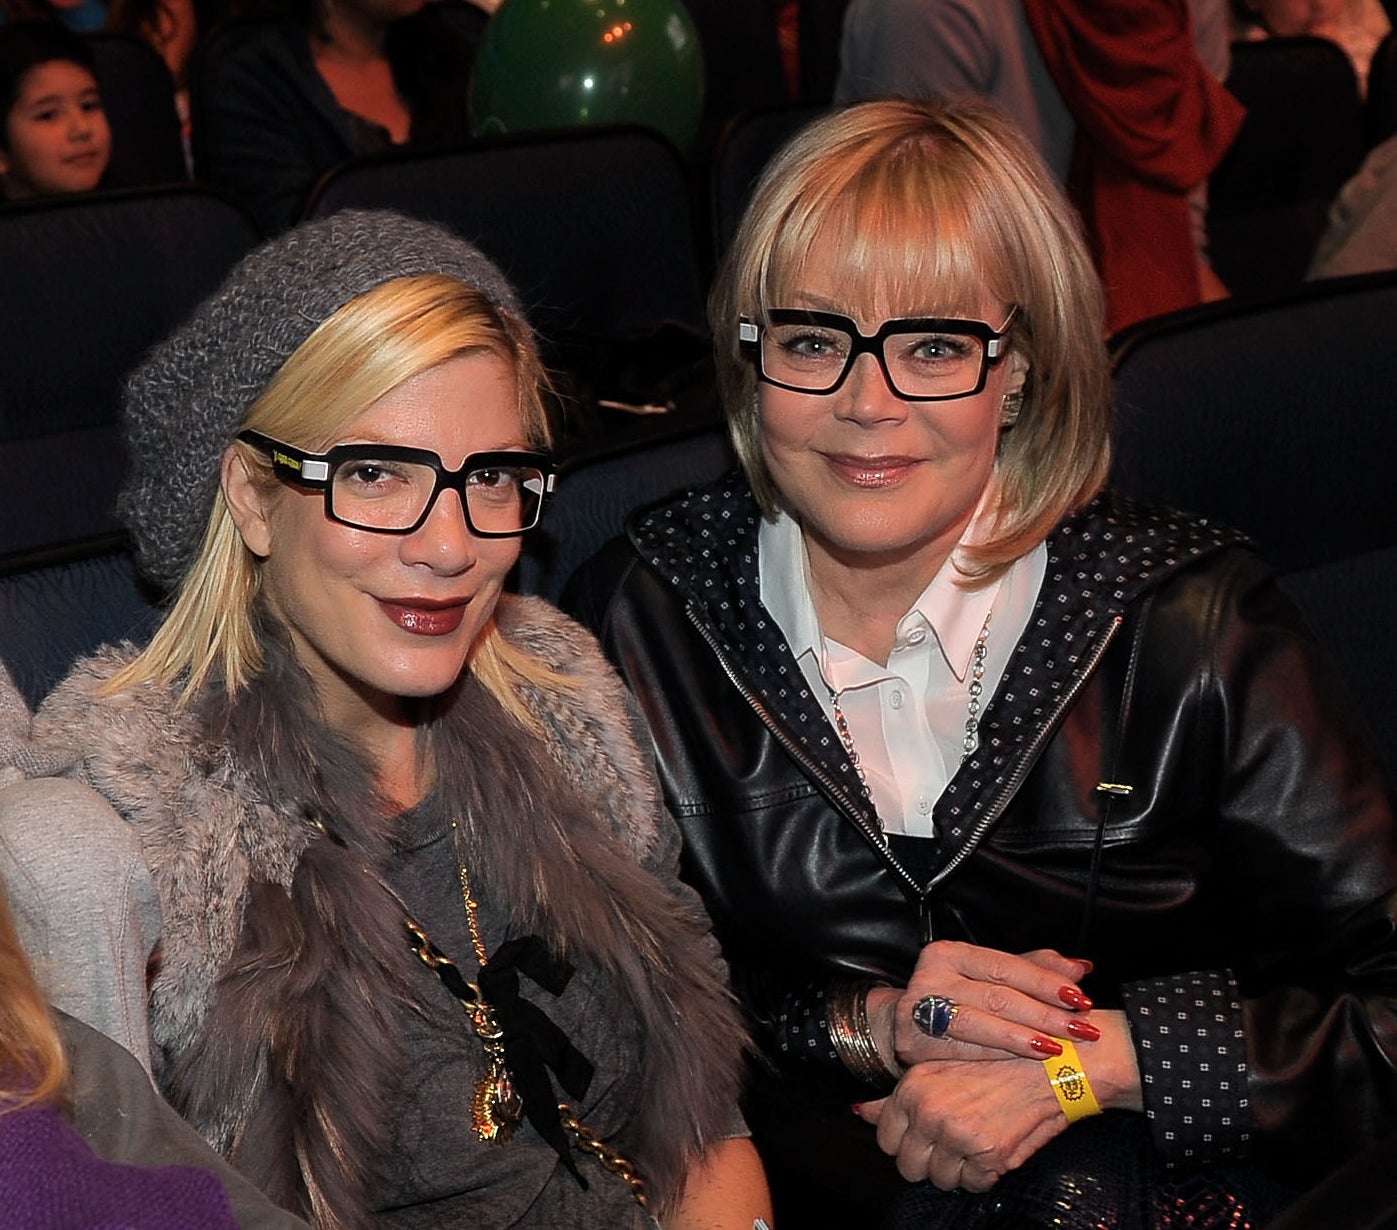 Tori and Candy Spelling at an event together